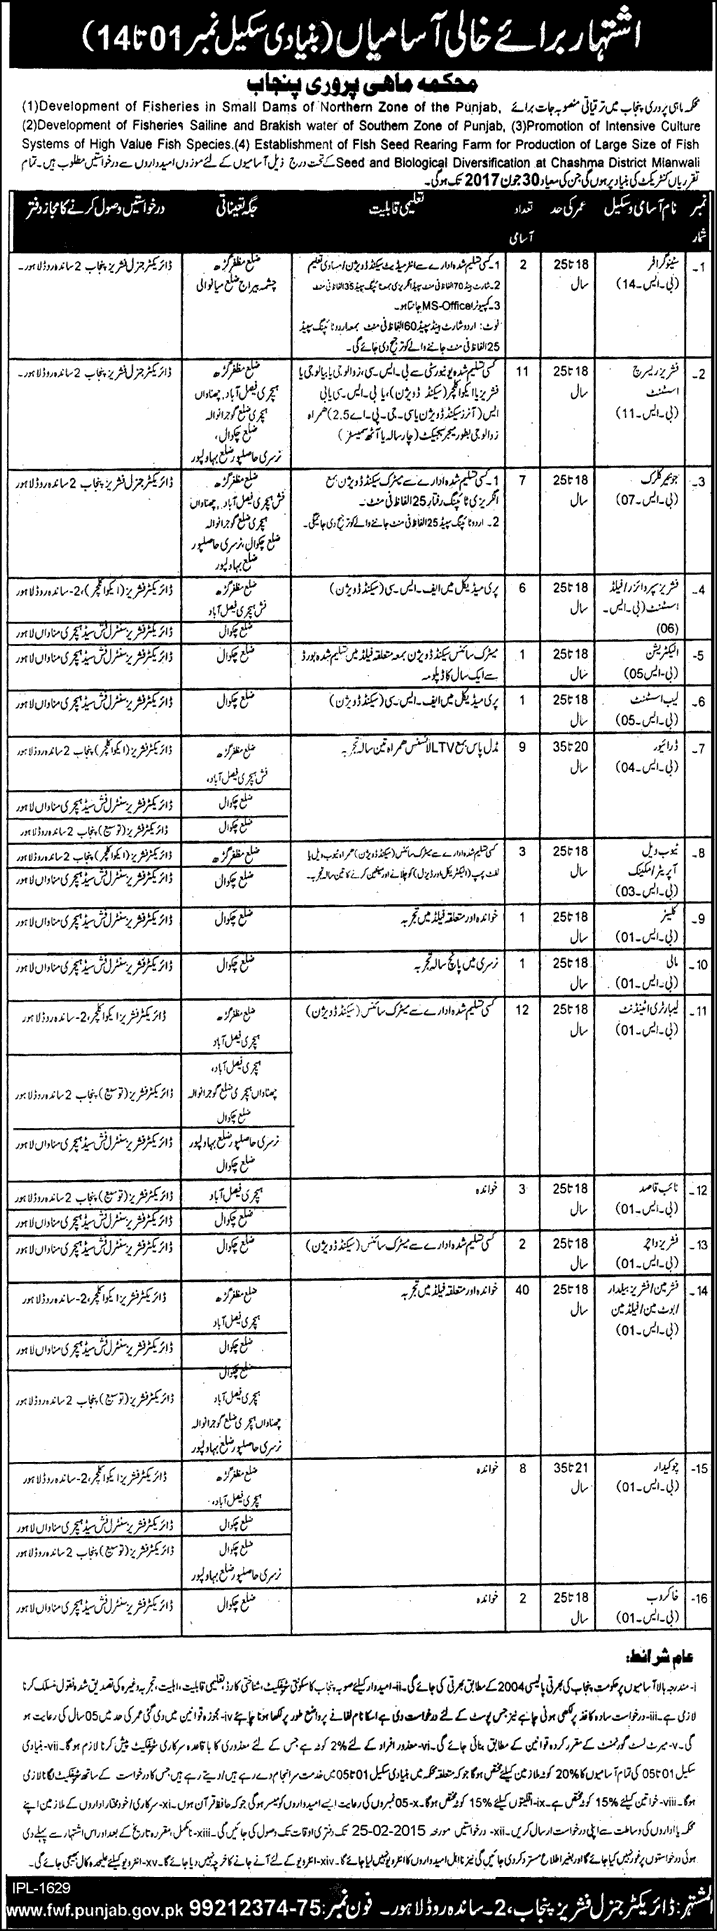 Fisheries Department Punjab Jobs 2015 February for Development Projects Latest